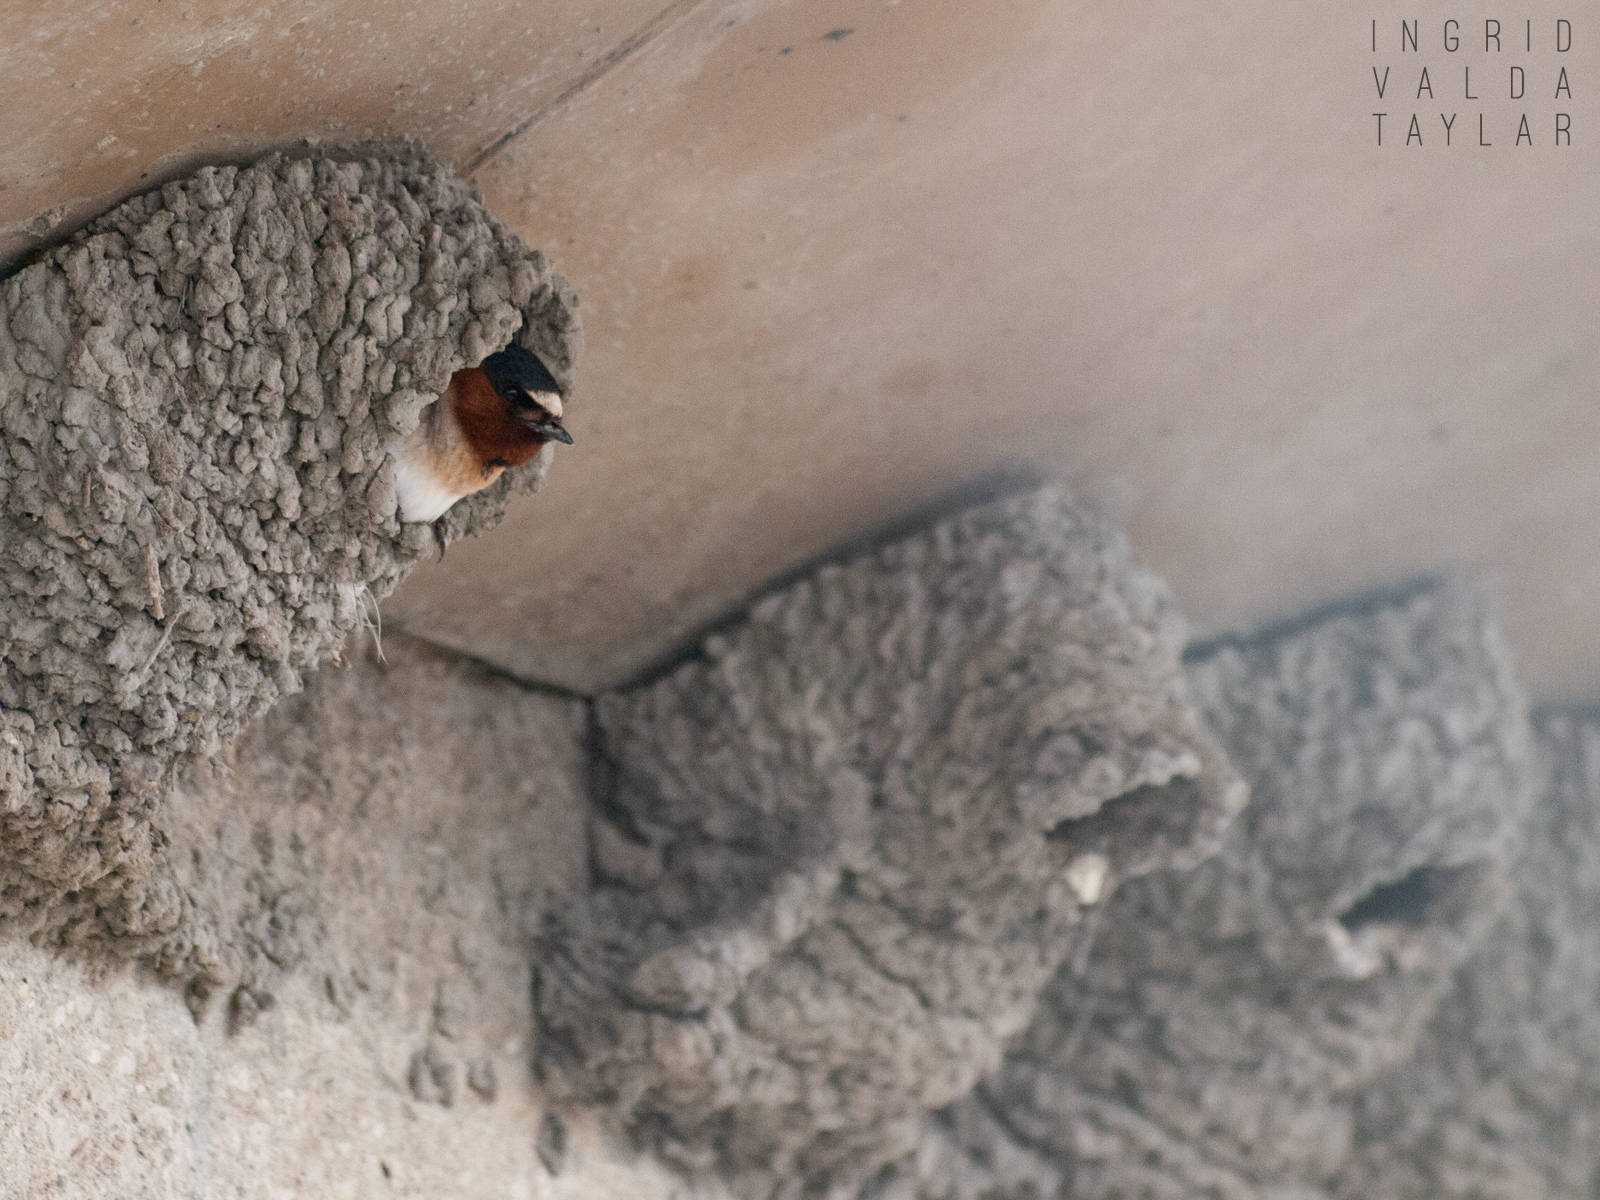 Cliff Swallow in Nest